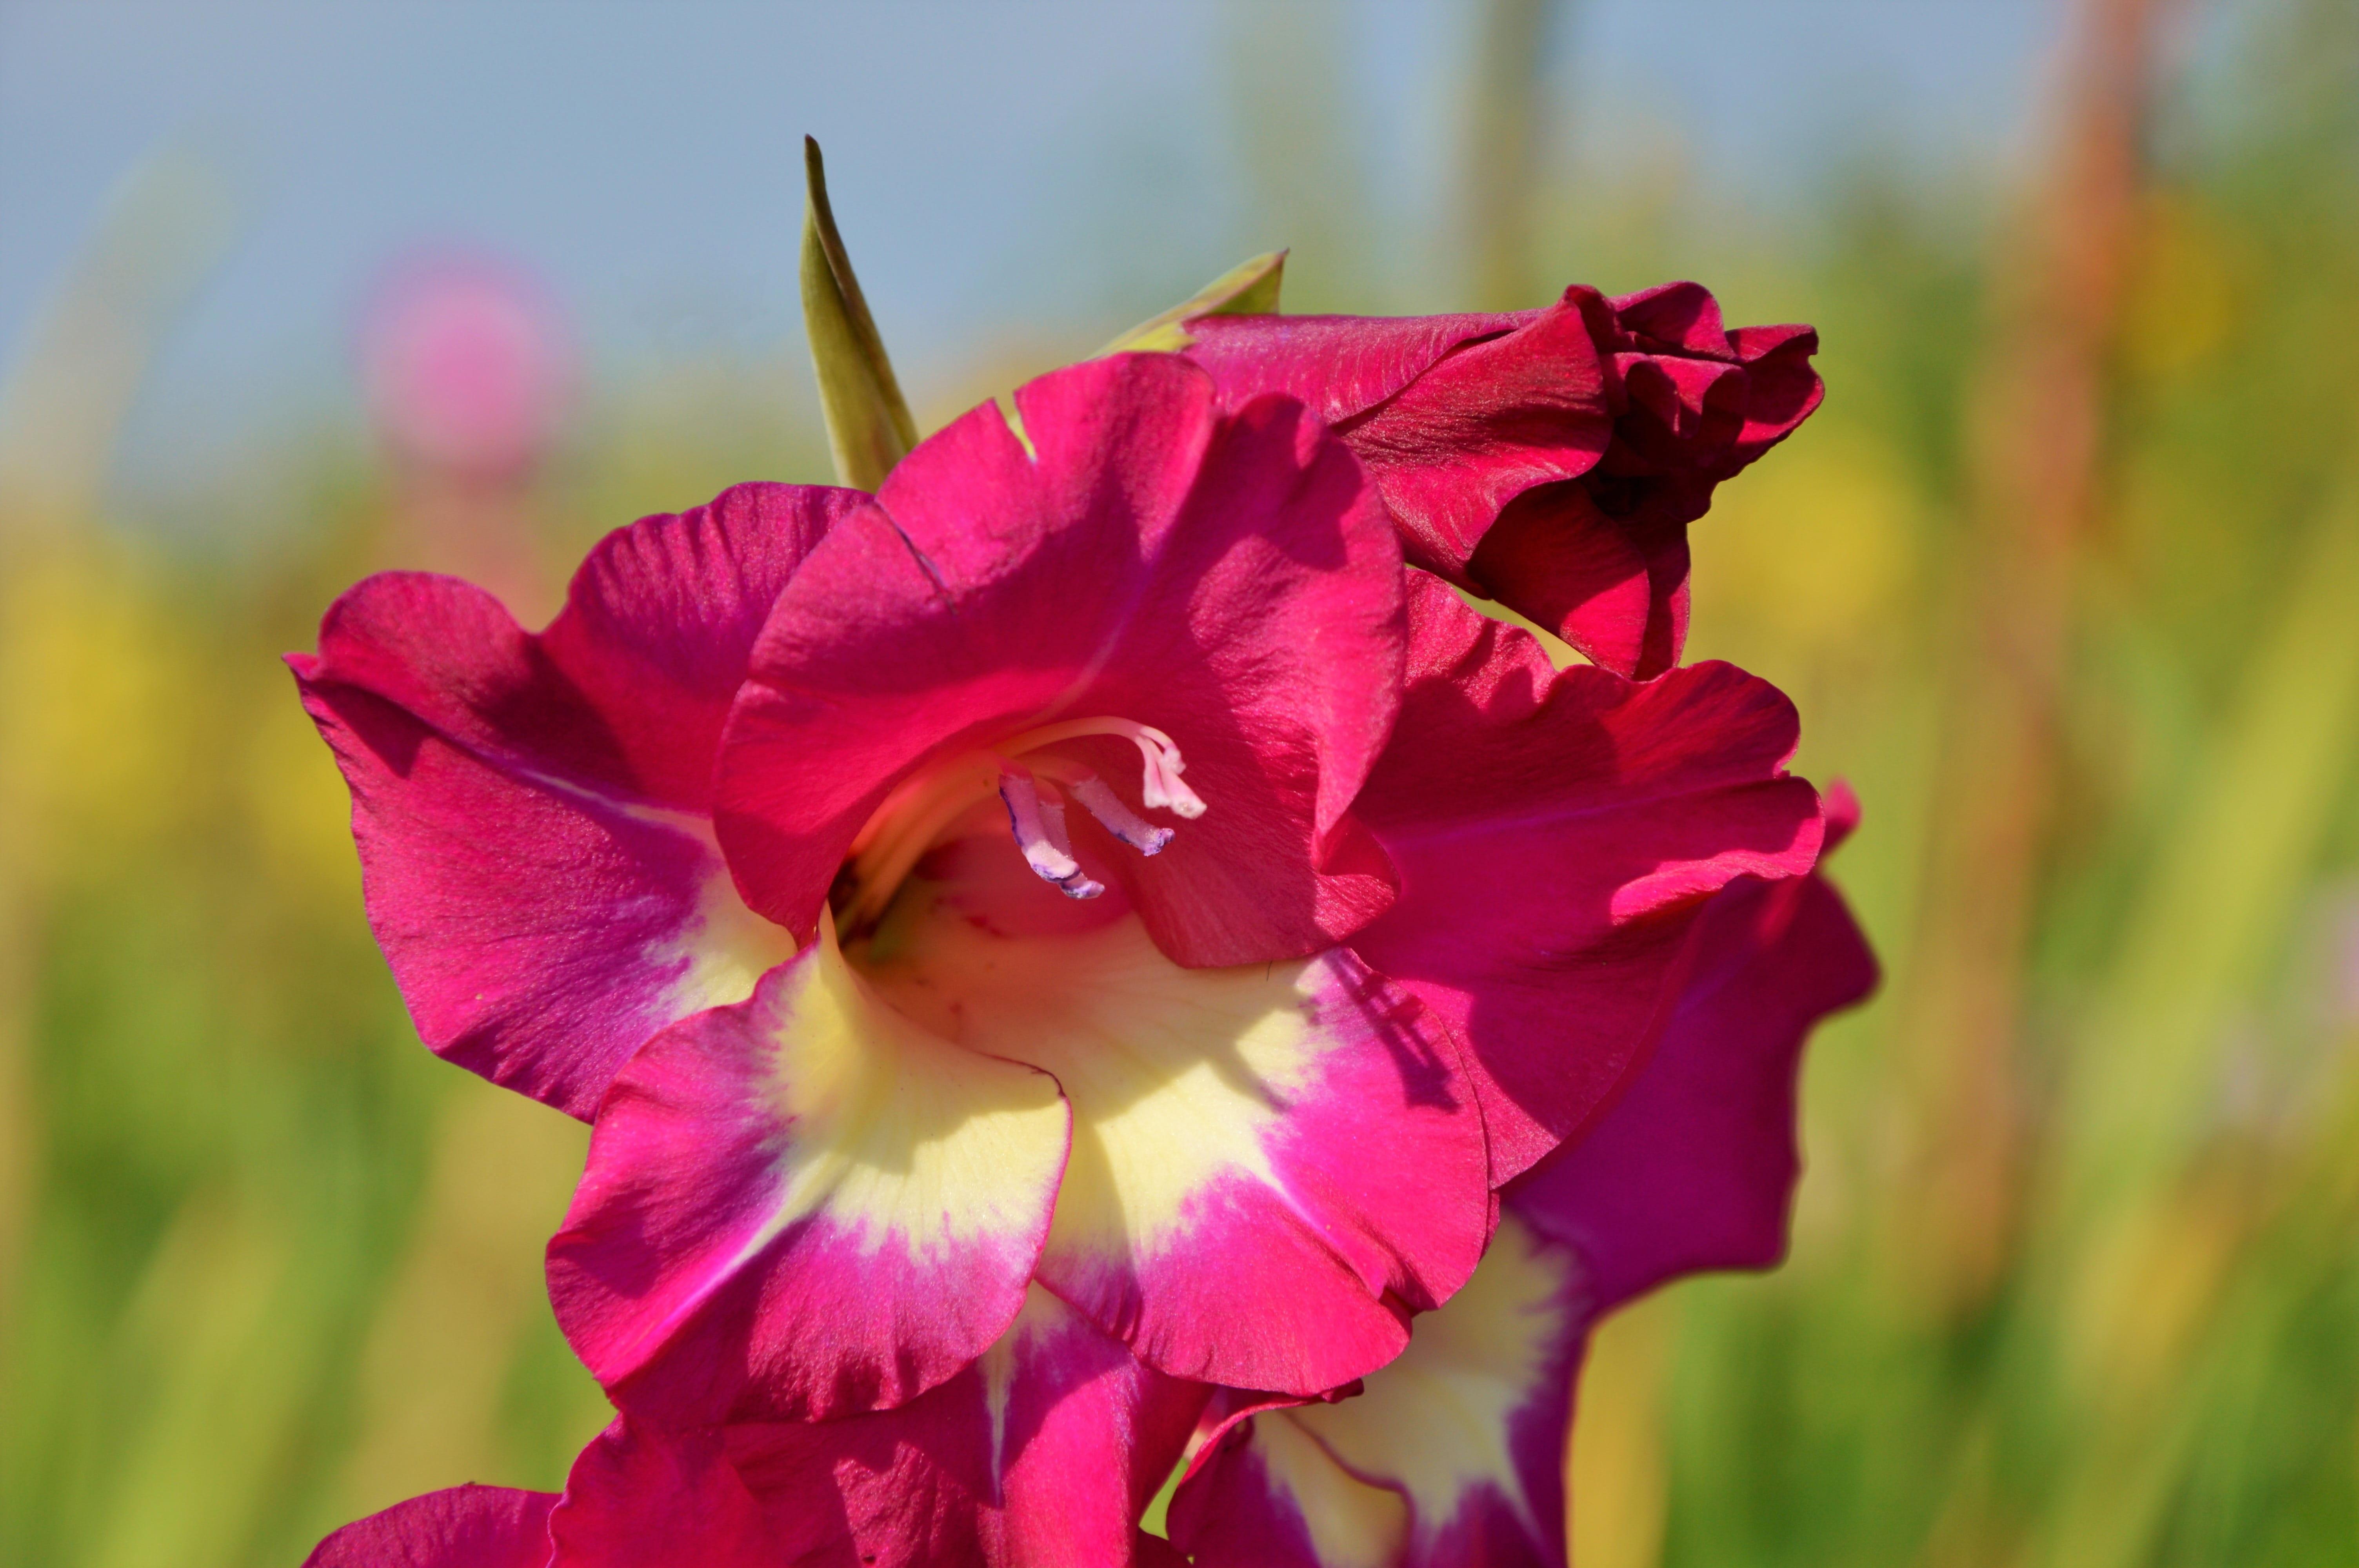 Gladiolus 'Dynamite' - Large Flowering Gladiolus (Shipping begins March 2021) from Leo Berbee Bulb Company